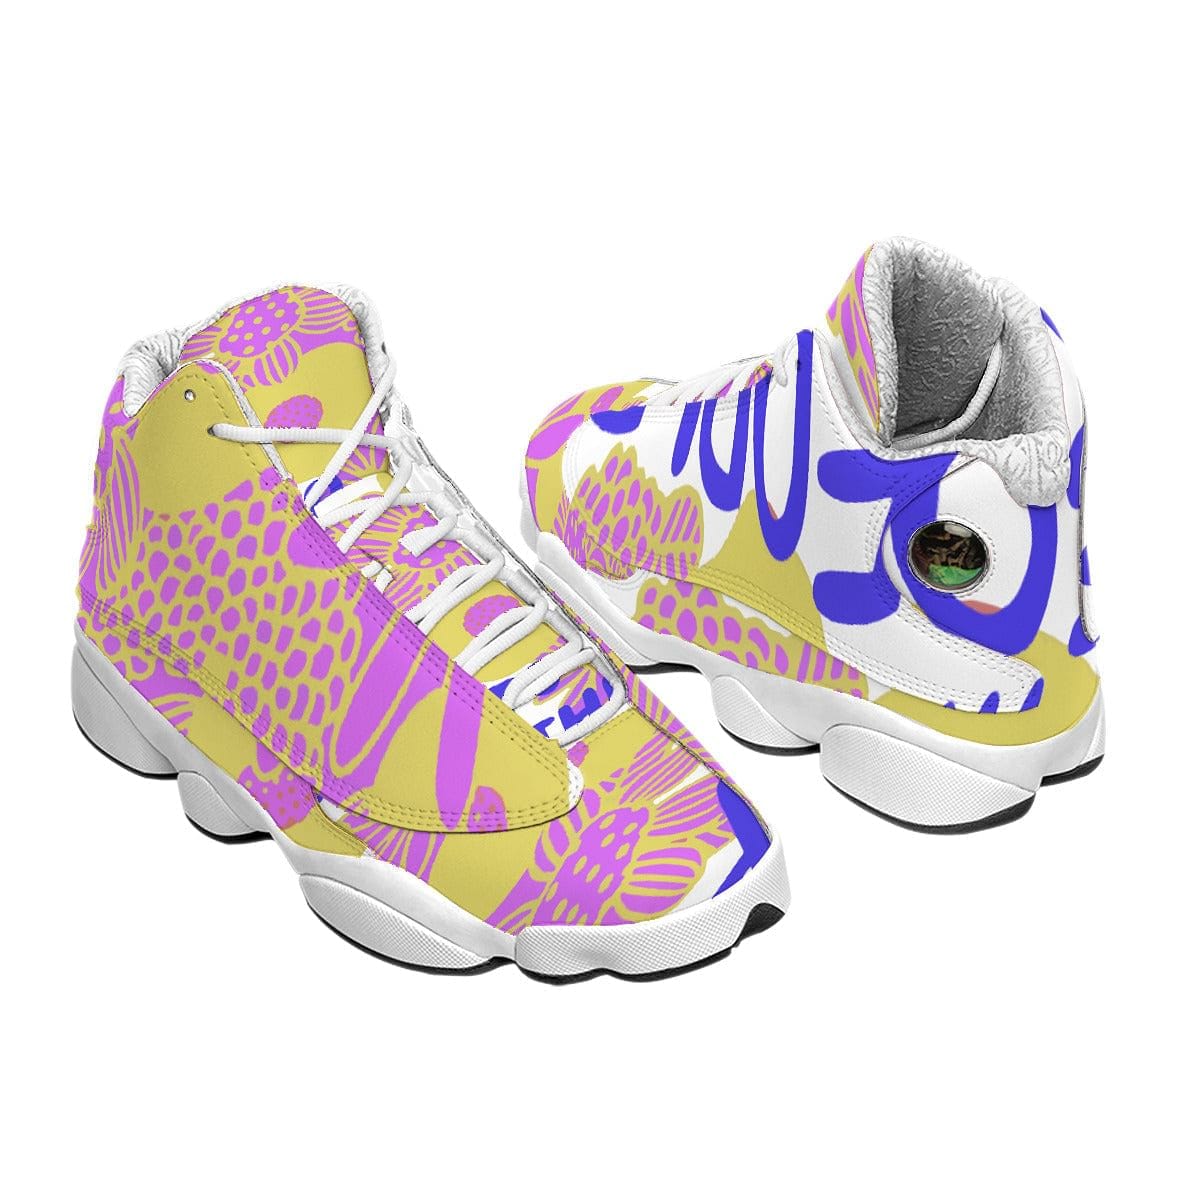 Women's Curved Basketball Shoes With Thick Soles